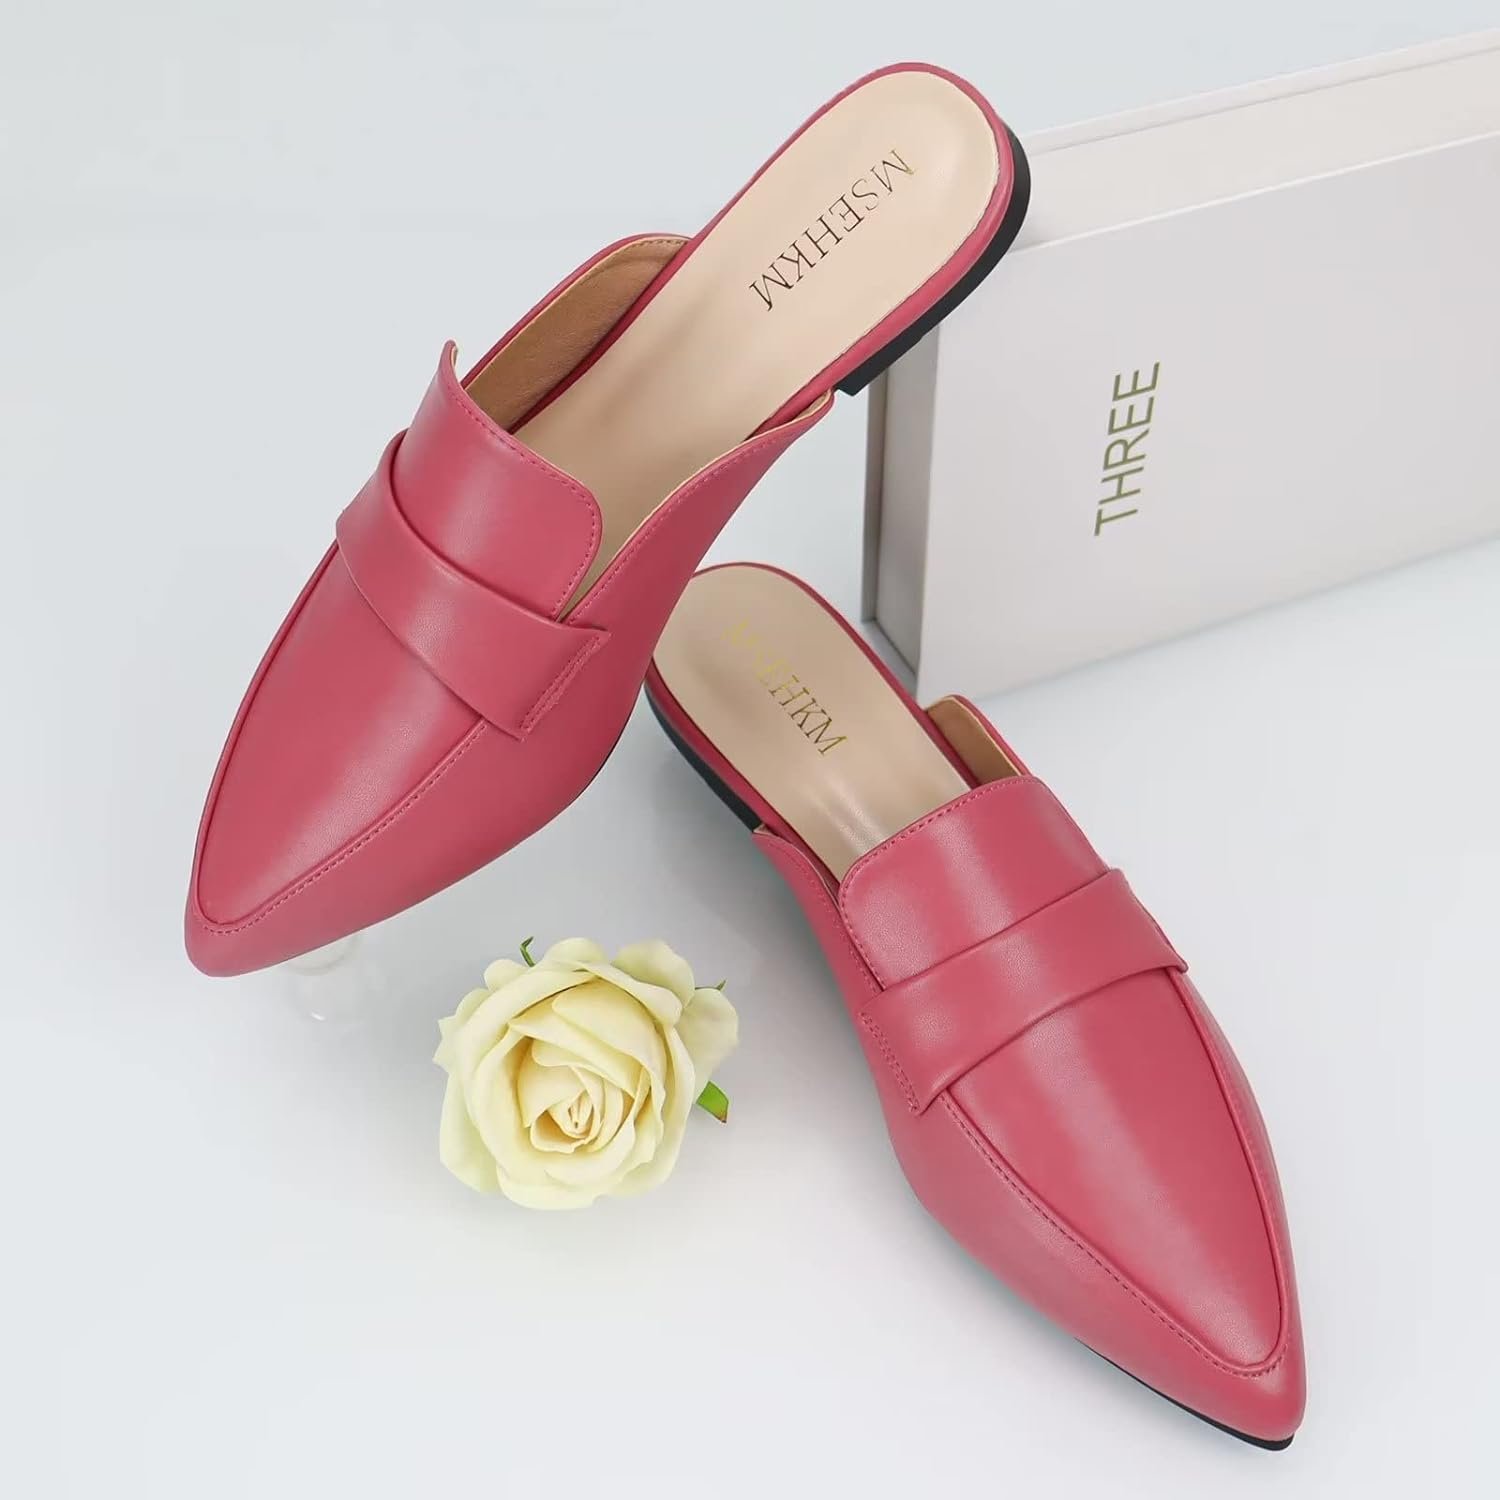 MSEHKM Womens Mules Flats- Classic Pointed Toe Design with Comfortable Fit for Everyday Wear- Penny/Leather Slippers Loafers